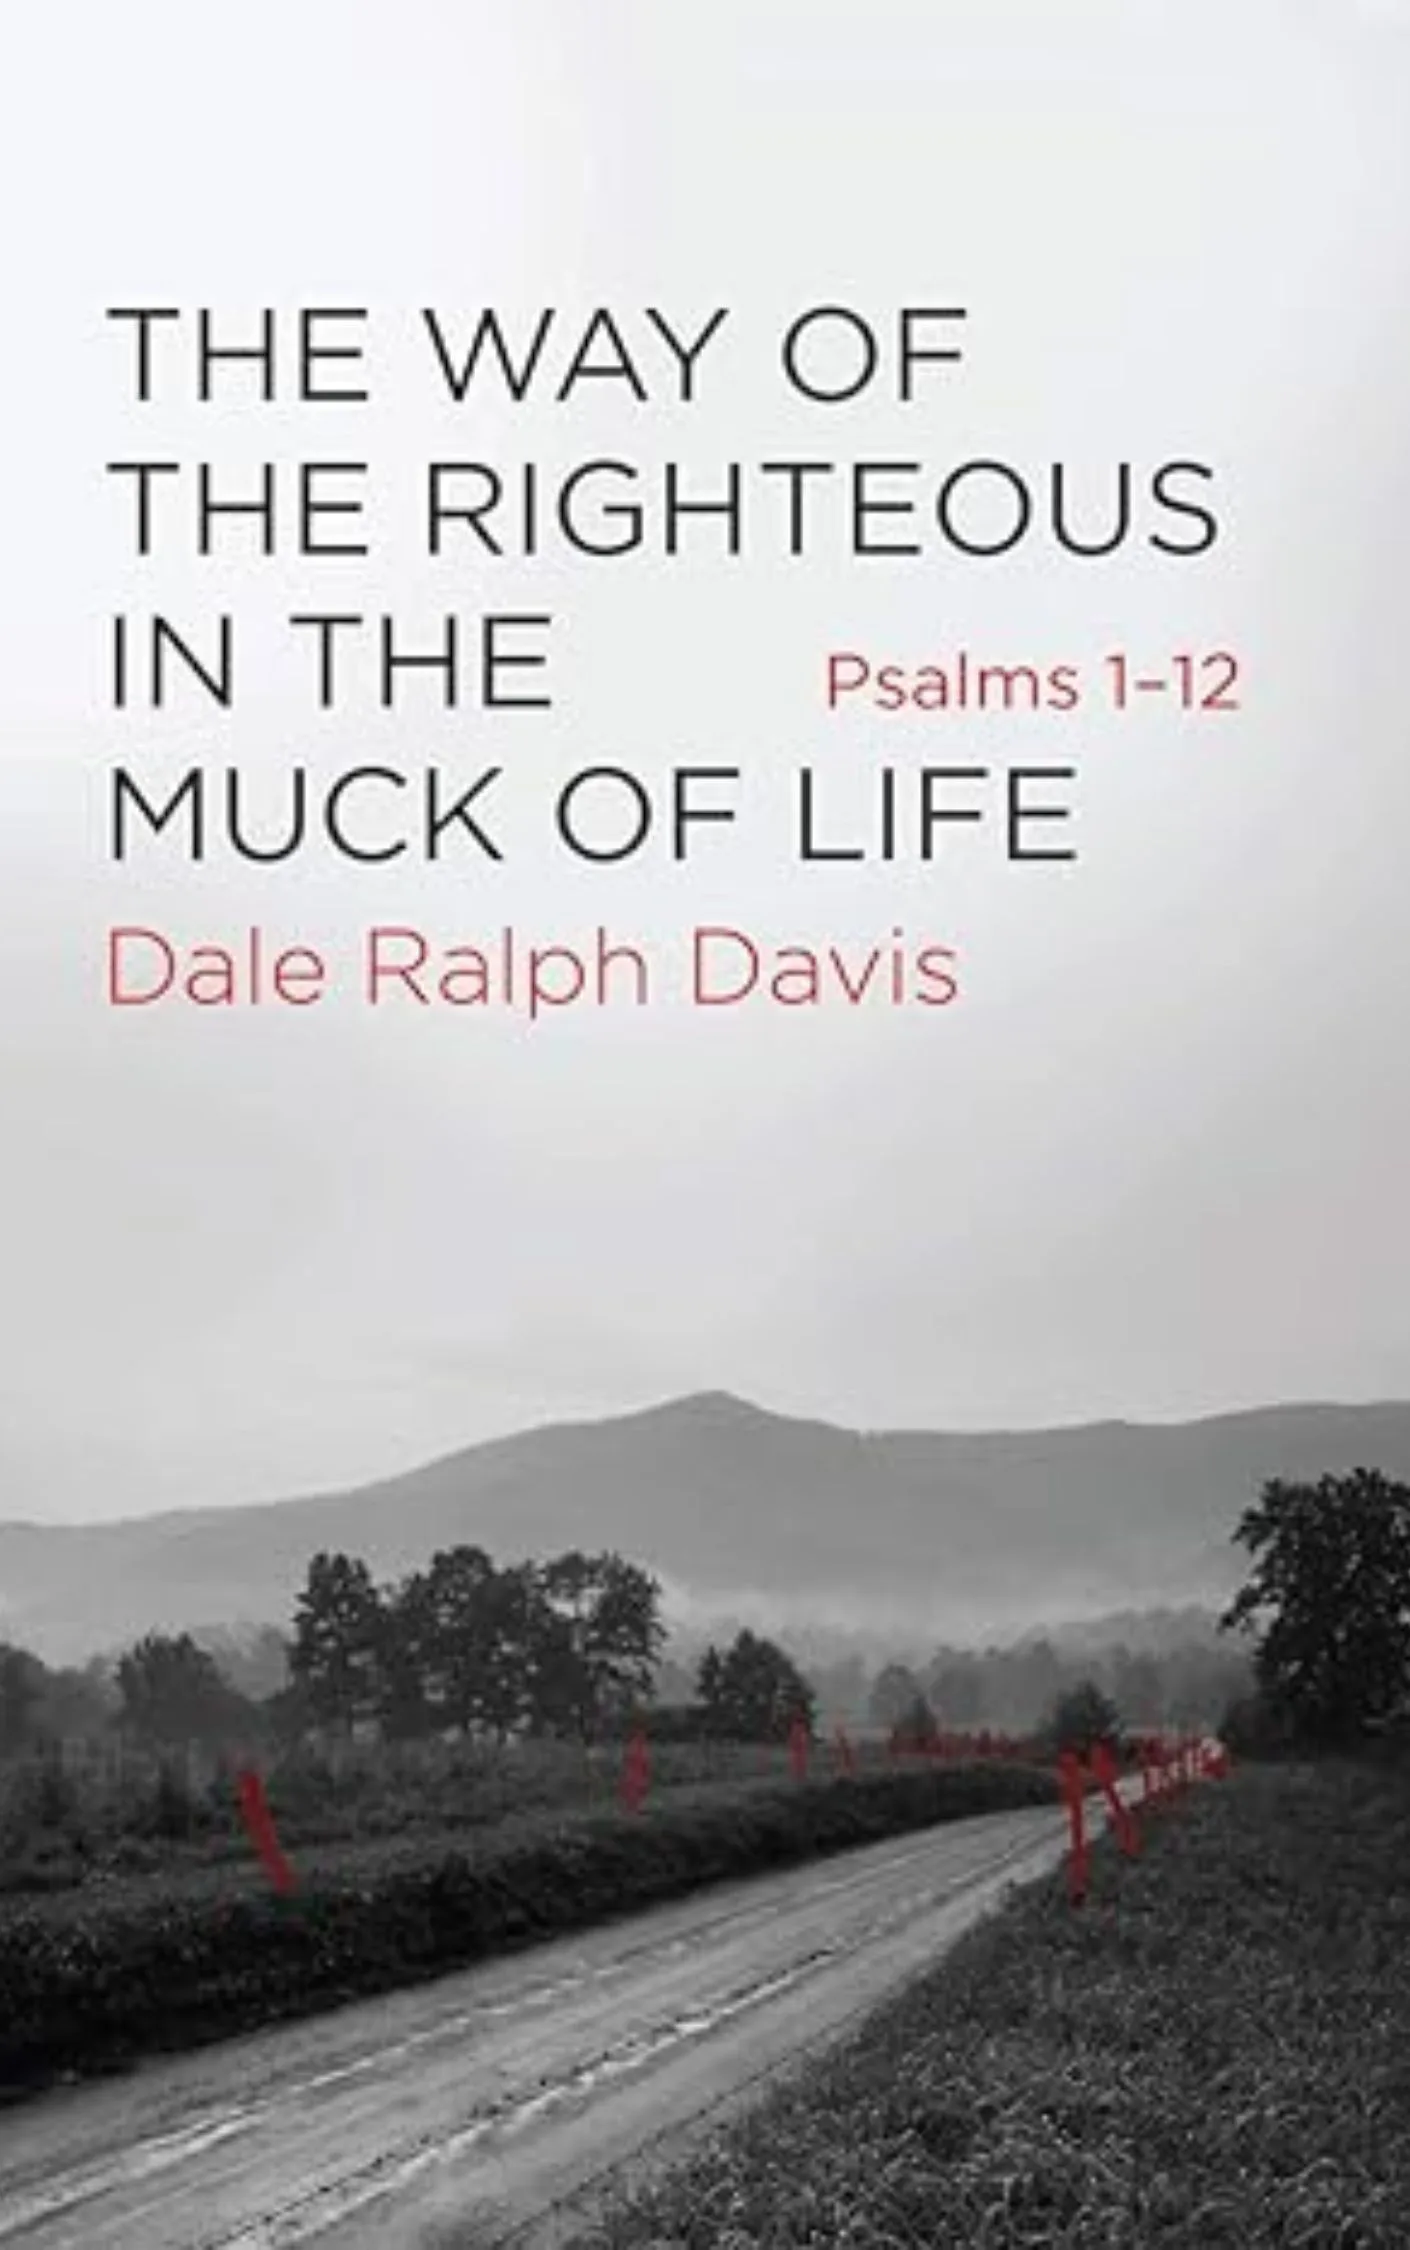 The Way of the Righteous in the Muck of Life: Psalms 1–12 by Dale Ralph Davis